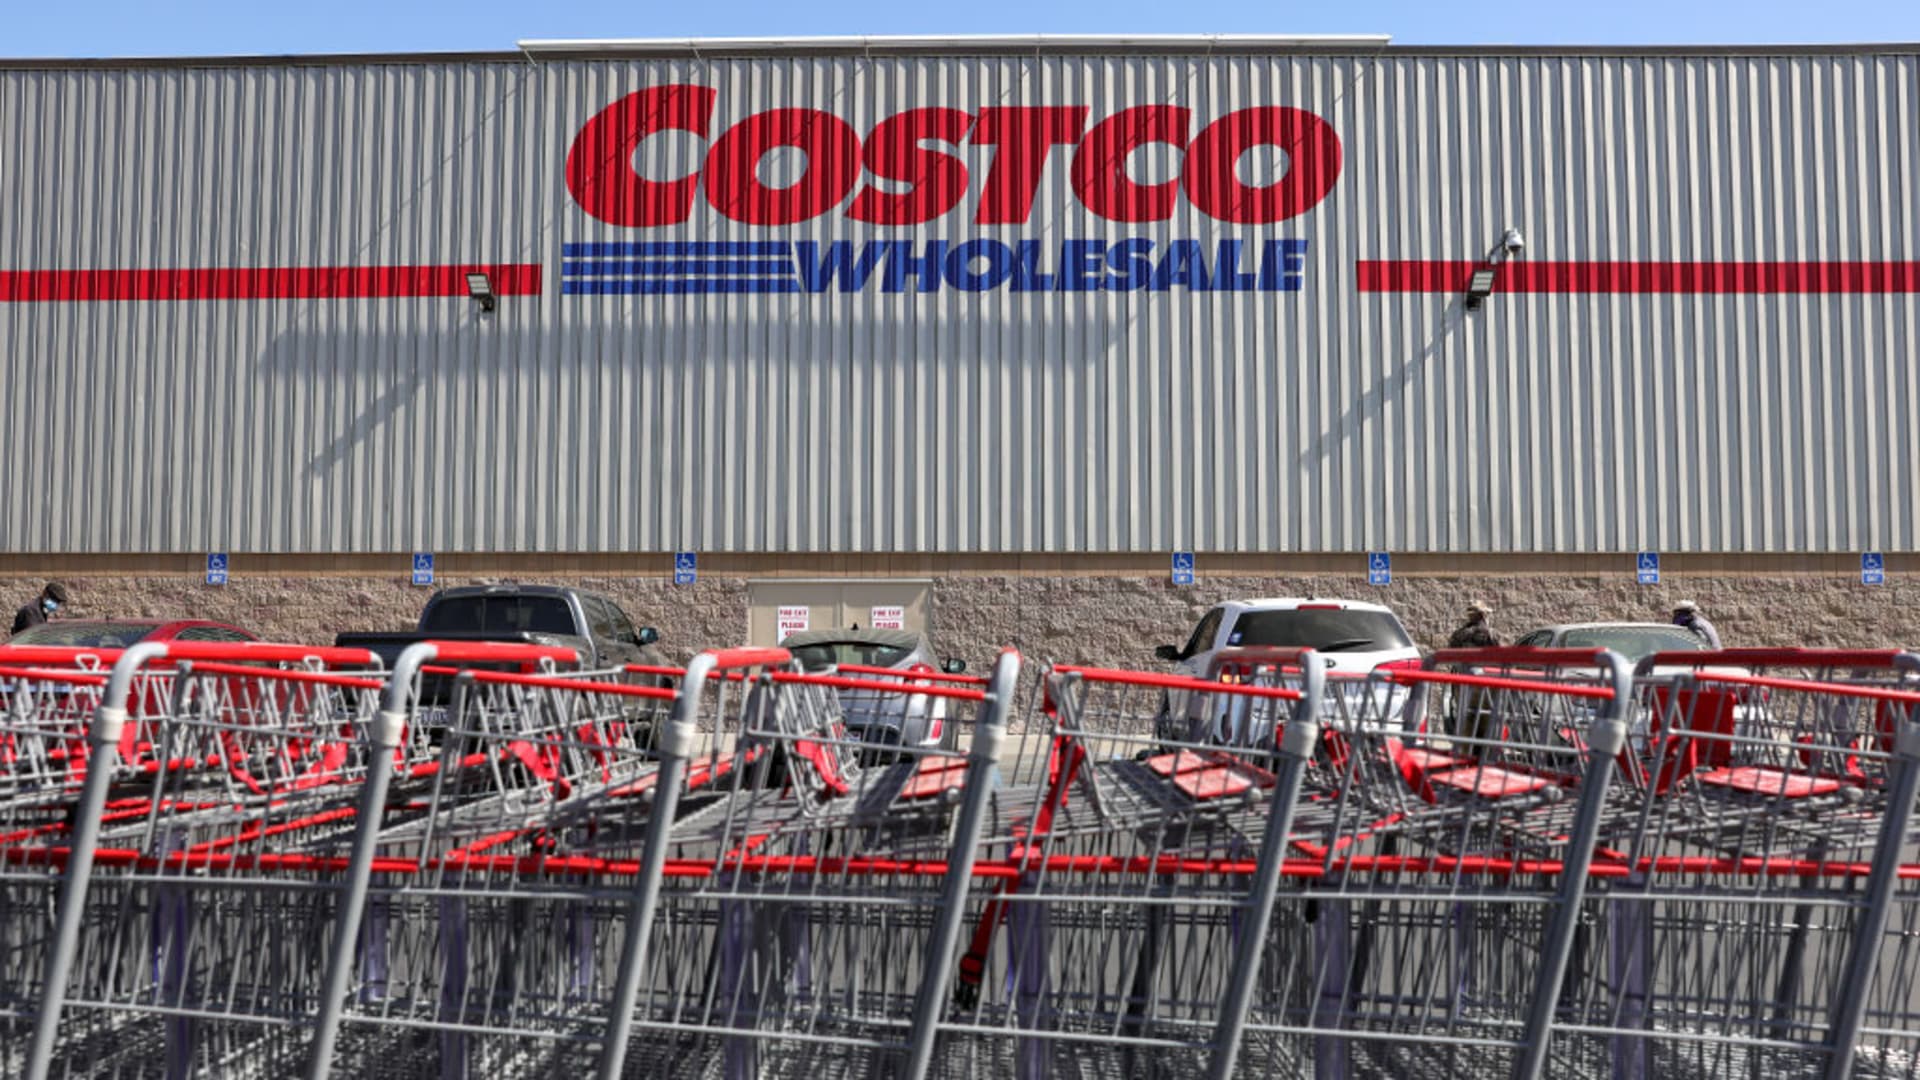 Costco’s quarterly results indicate retailer is thriving despite high inflation – CNBC